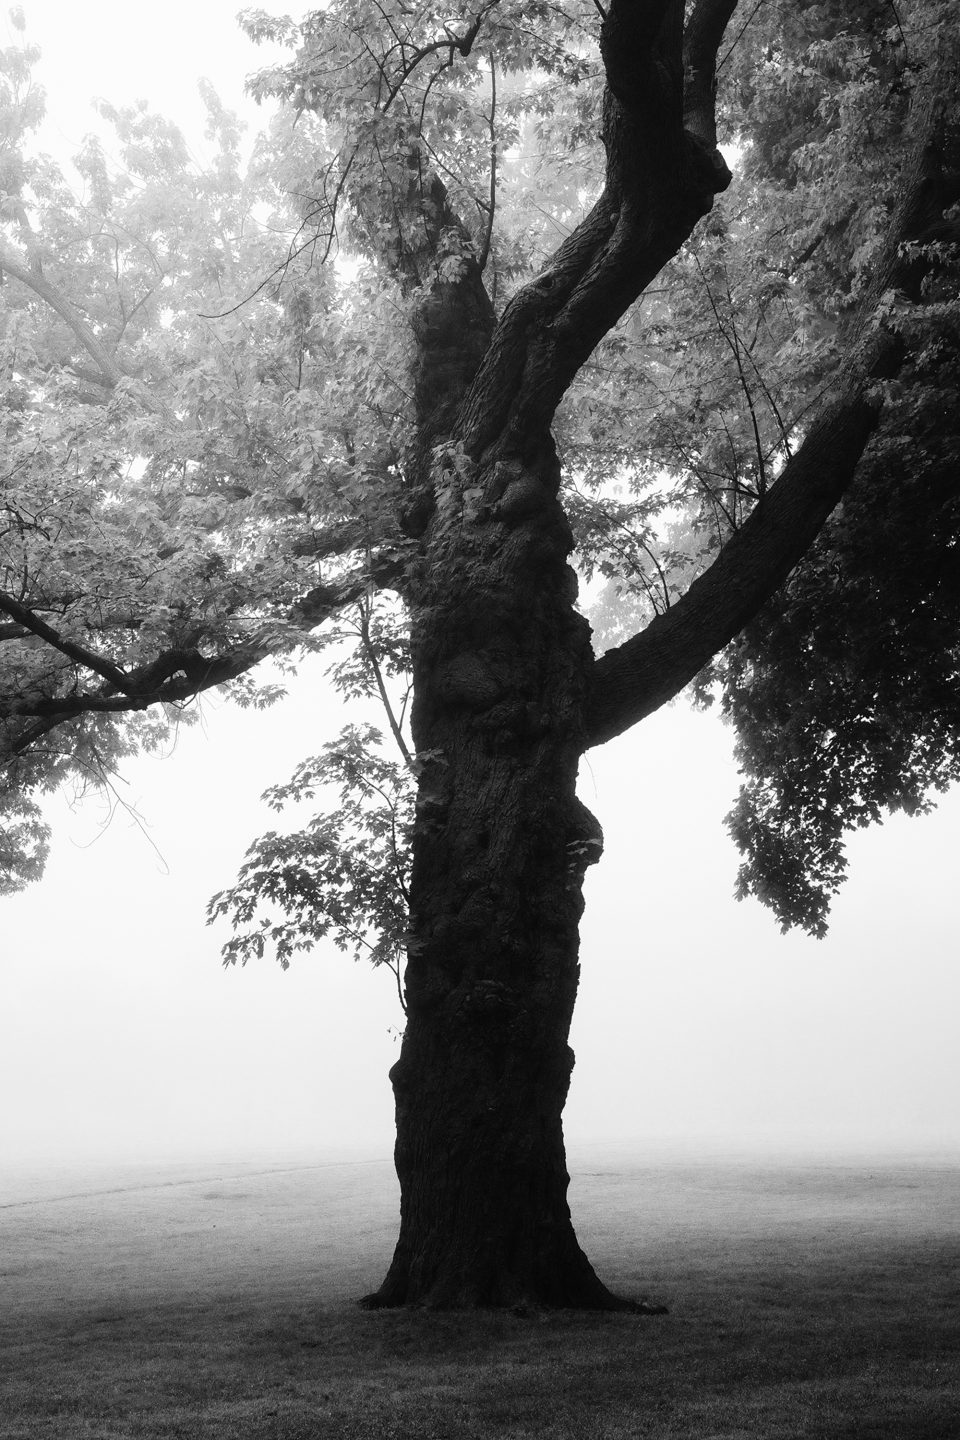 Black and white landscape photograph of a big old tree in the dramatic light of a foggy morning